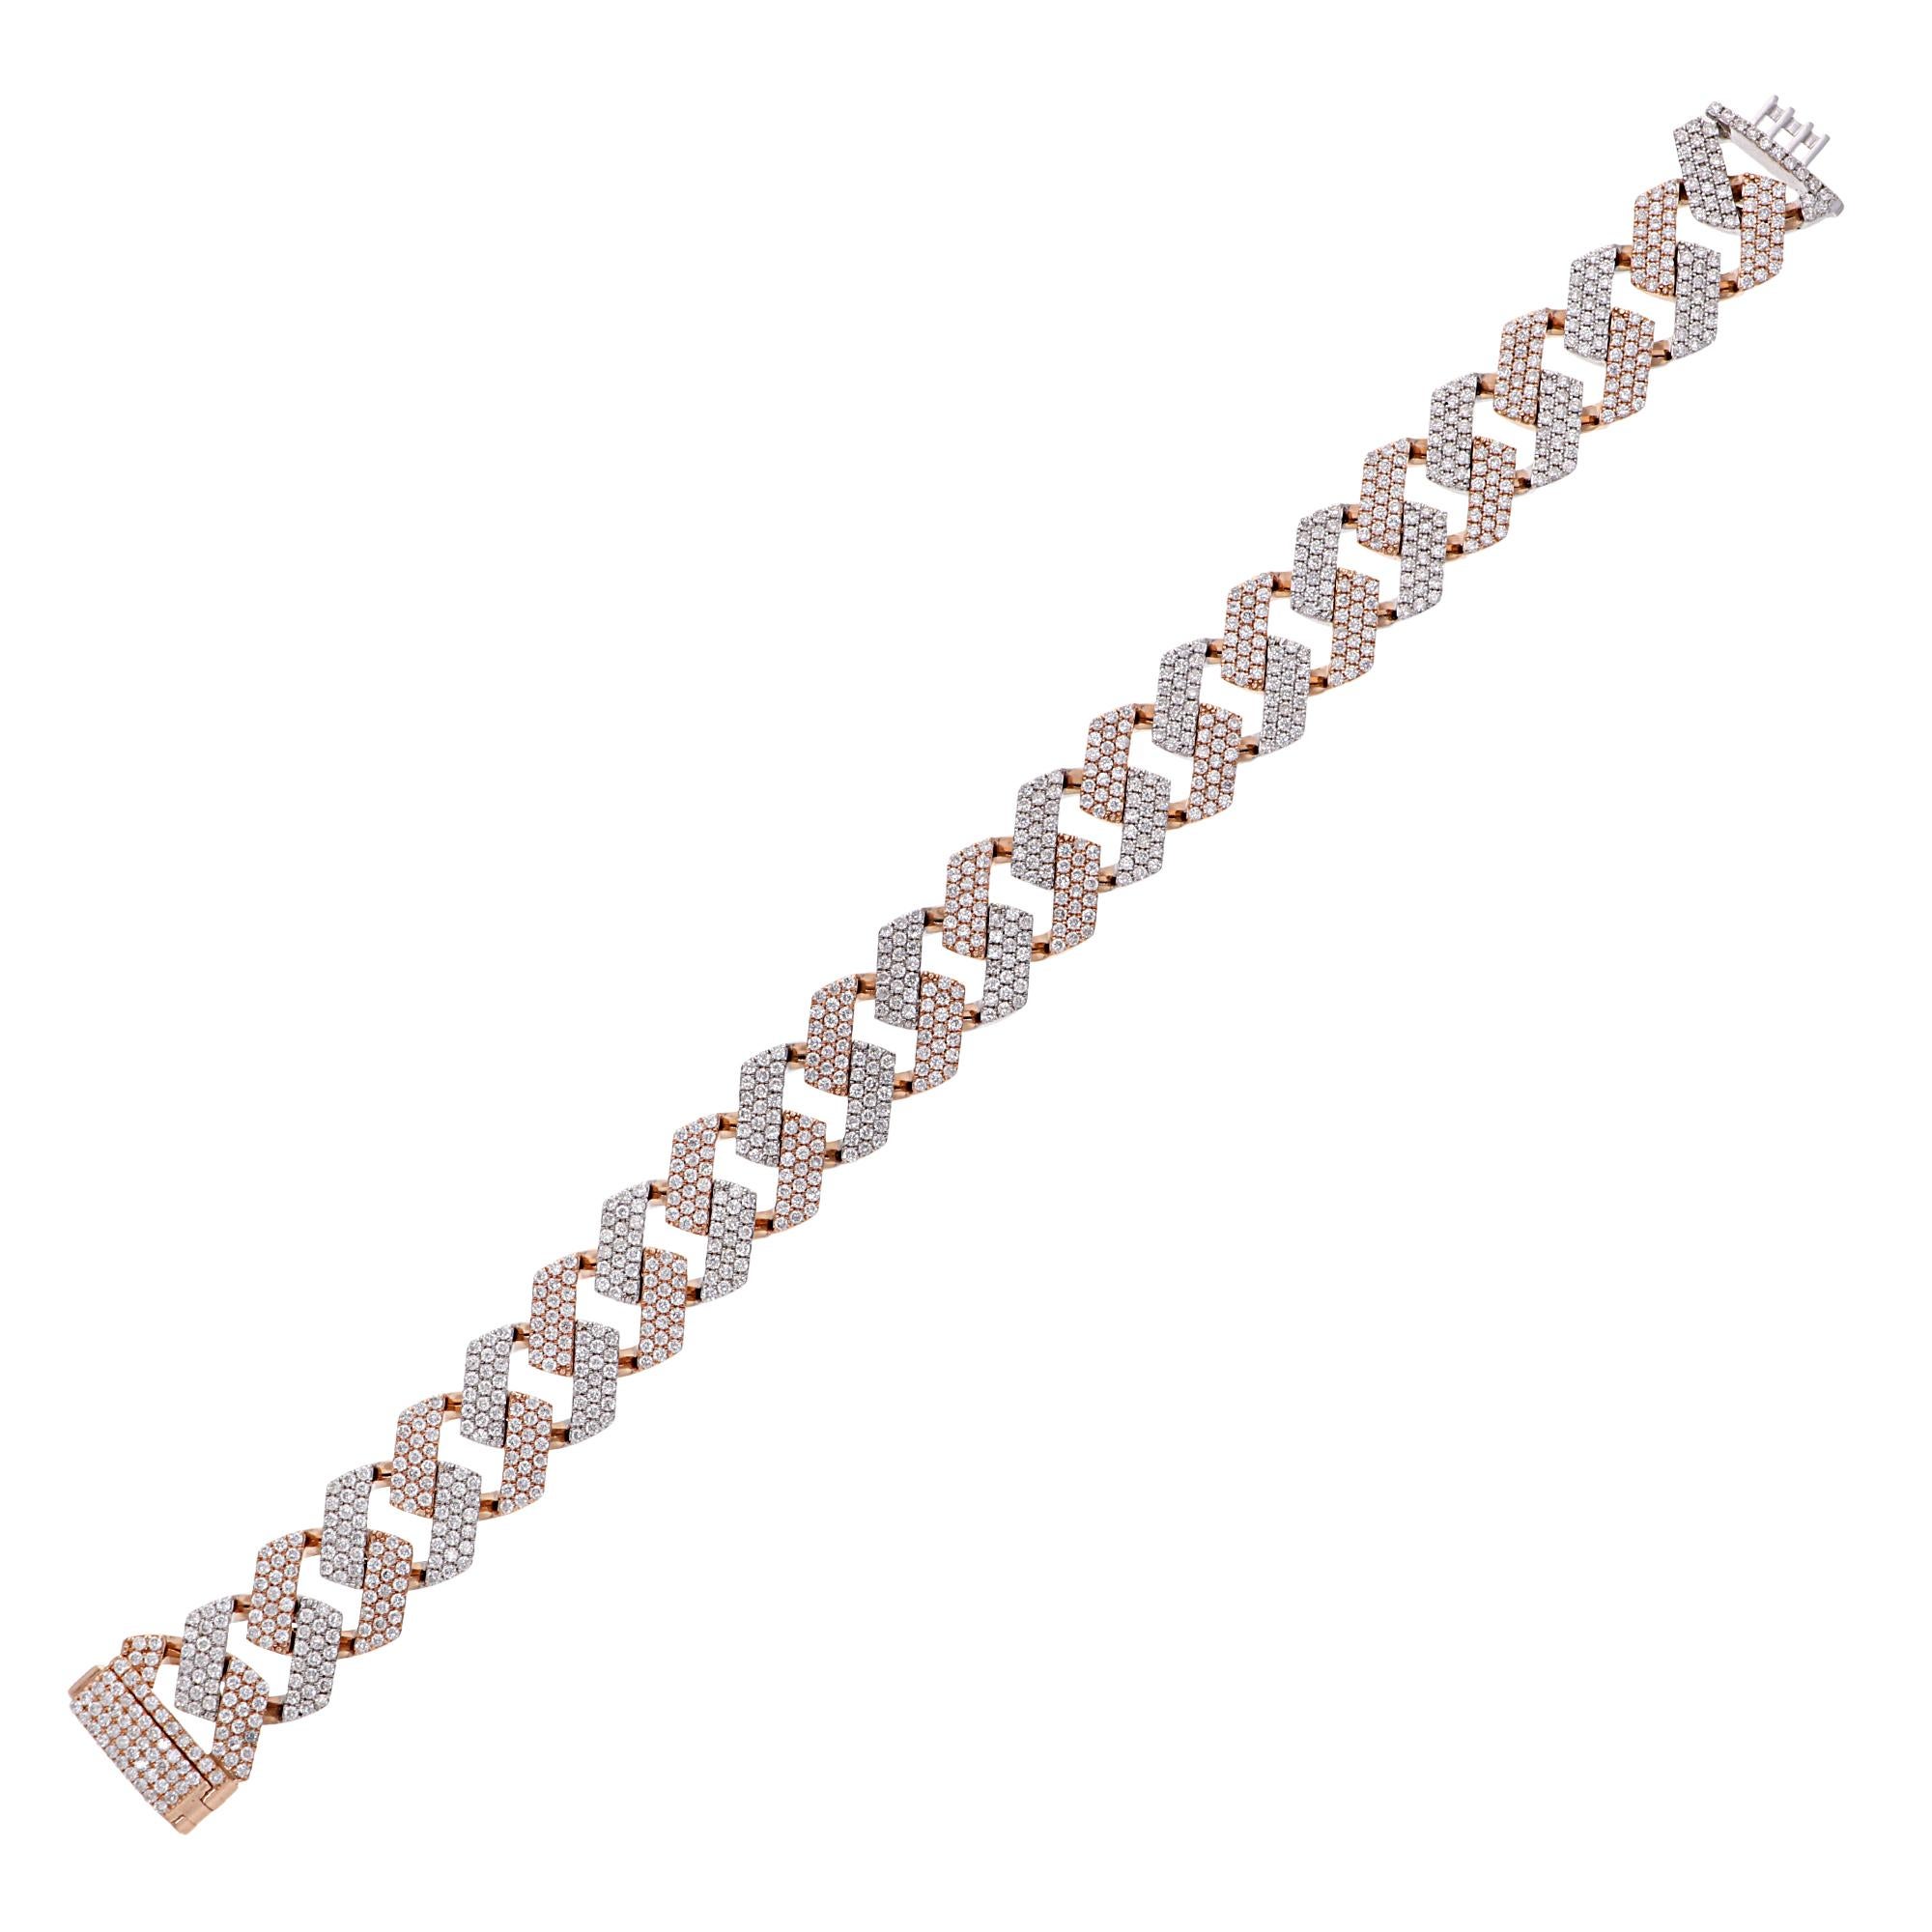 Item Code :- SEBR-42219
Gross Wt. :- 43.84 gm
18k White & Rose Gold Wt. :- 42.08 gm
Diamond Wt. :- 8.80 Ct. ( AVERAGE DIAMOND CLARITY SI1-SI2 & COLOR H-I )
Bracelet Length :- 8 Inches Long
✦ Sizing
.....................
We can adjust most items to